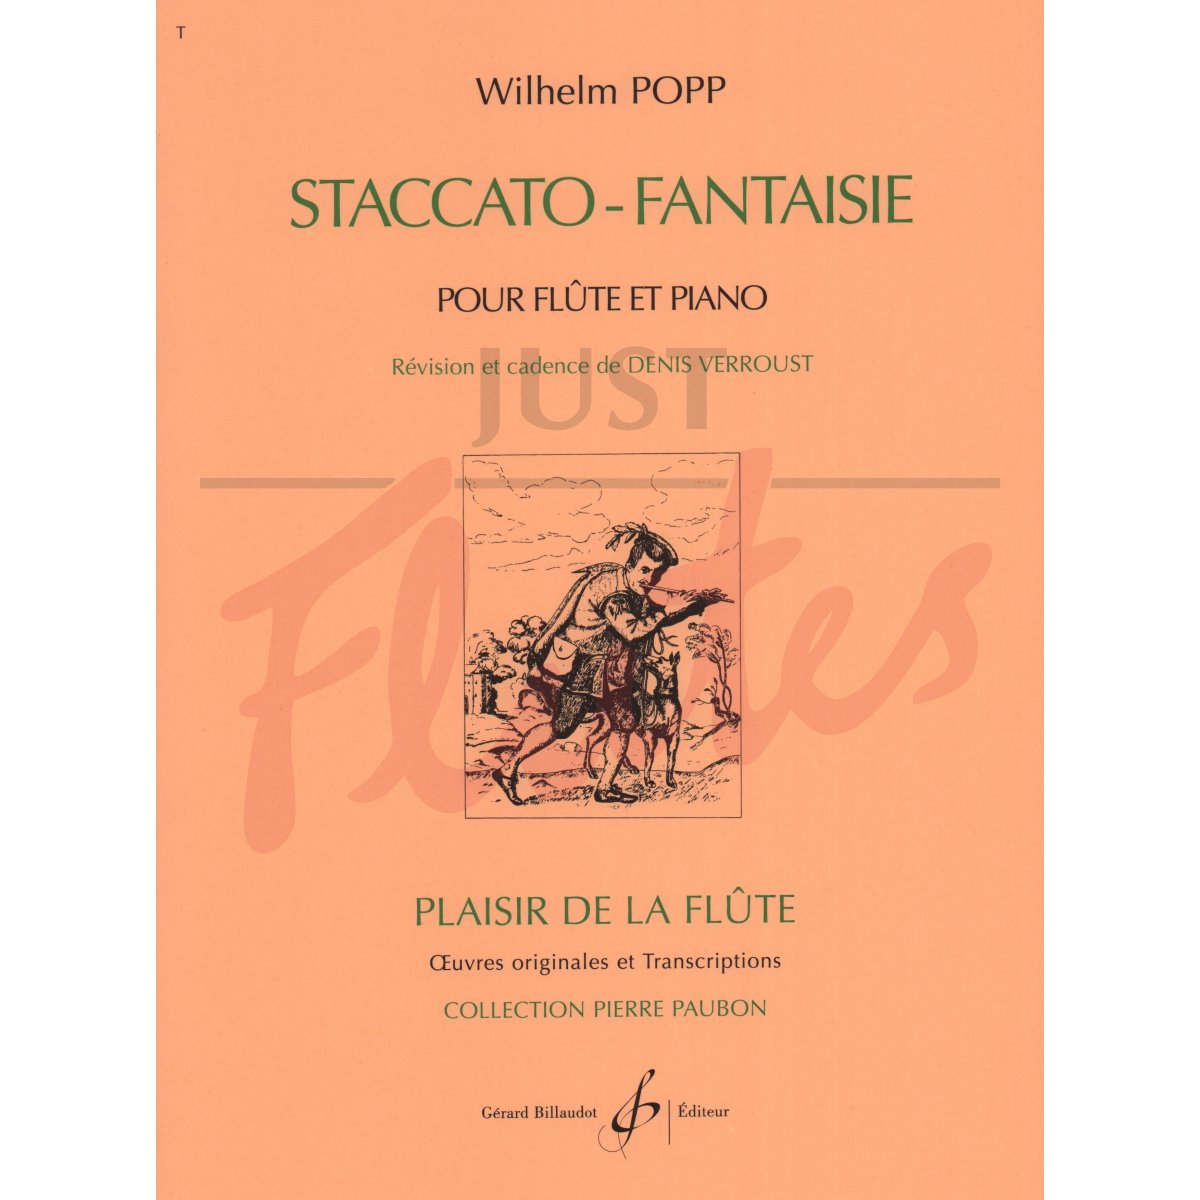 Staccato Fantasie for Flute and Piano